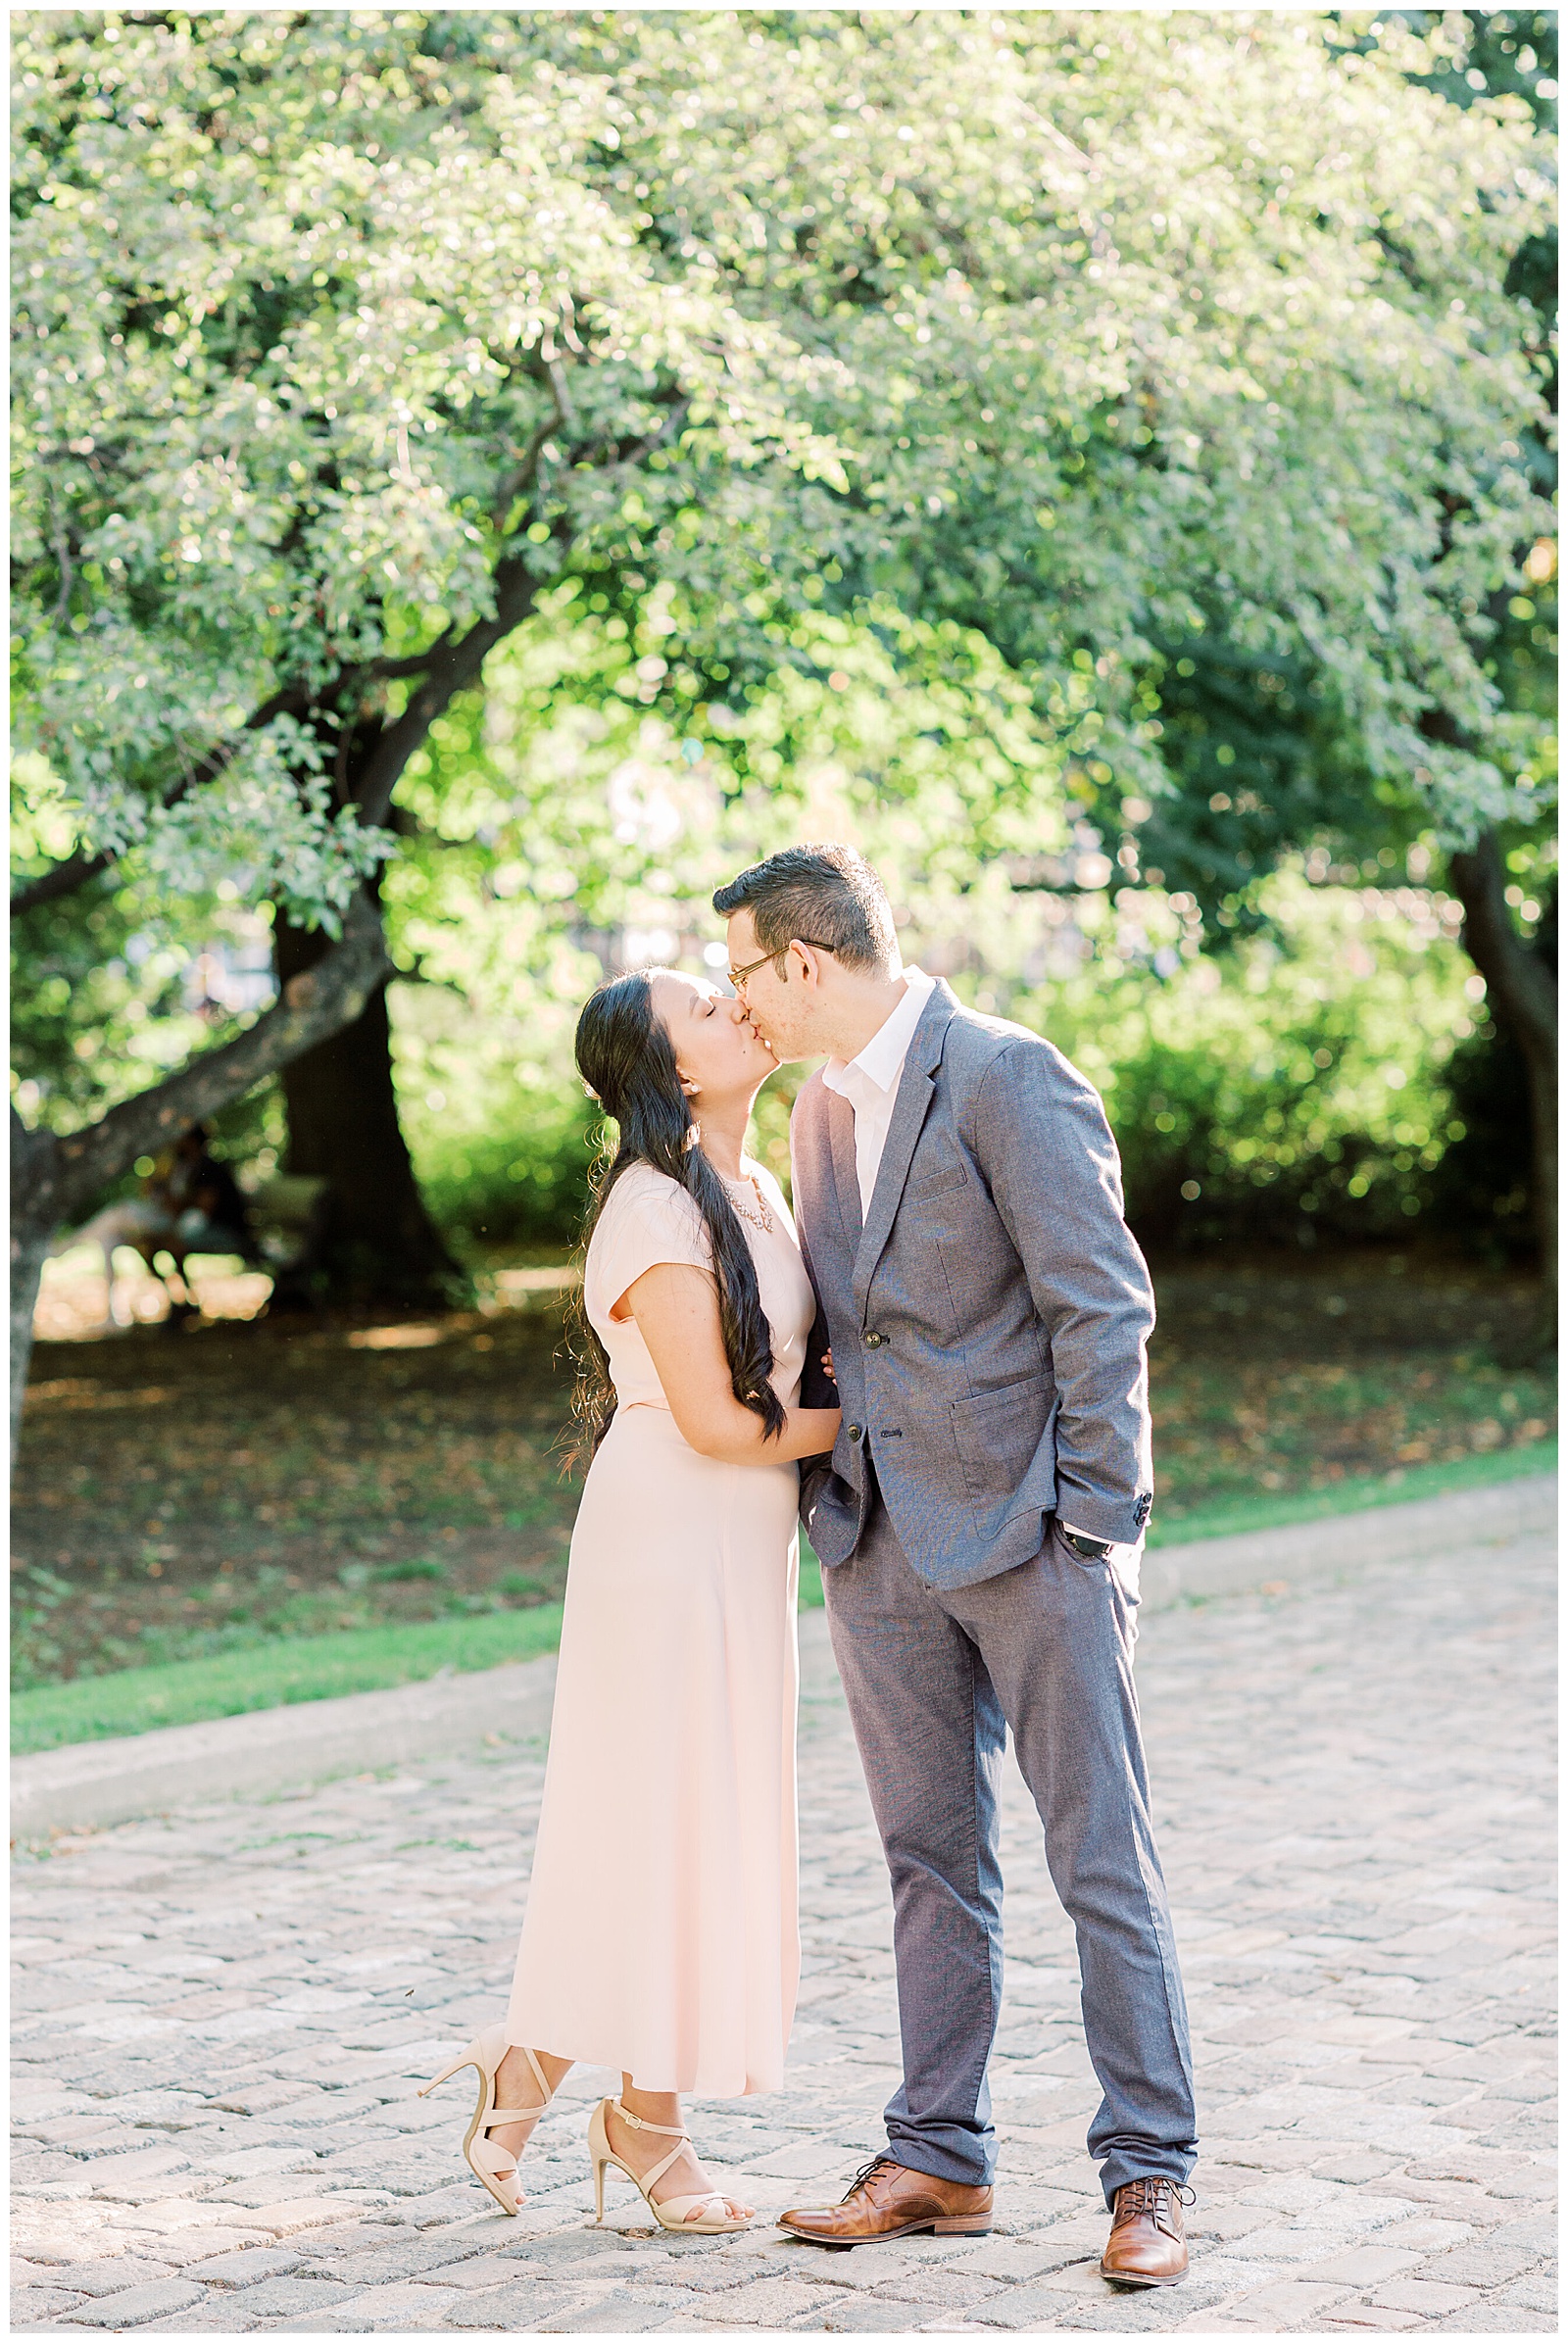 Osgoode Hall Summer Engagement Session - Couple kissing at Osgoode Hall